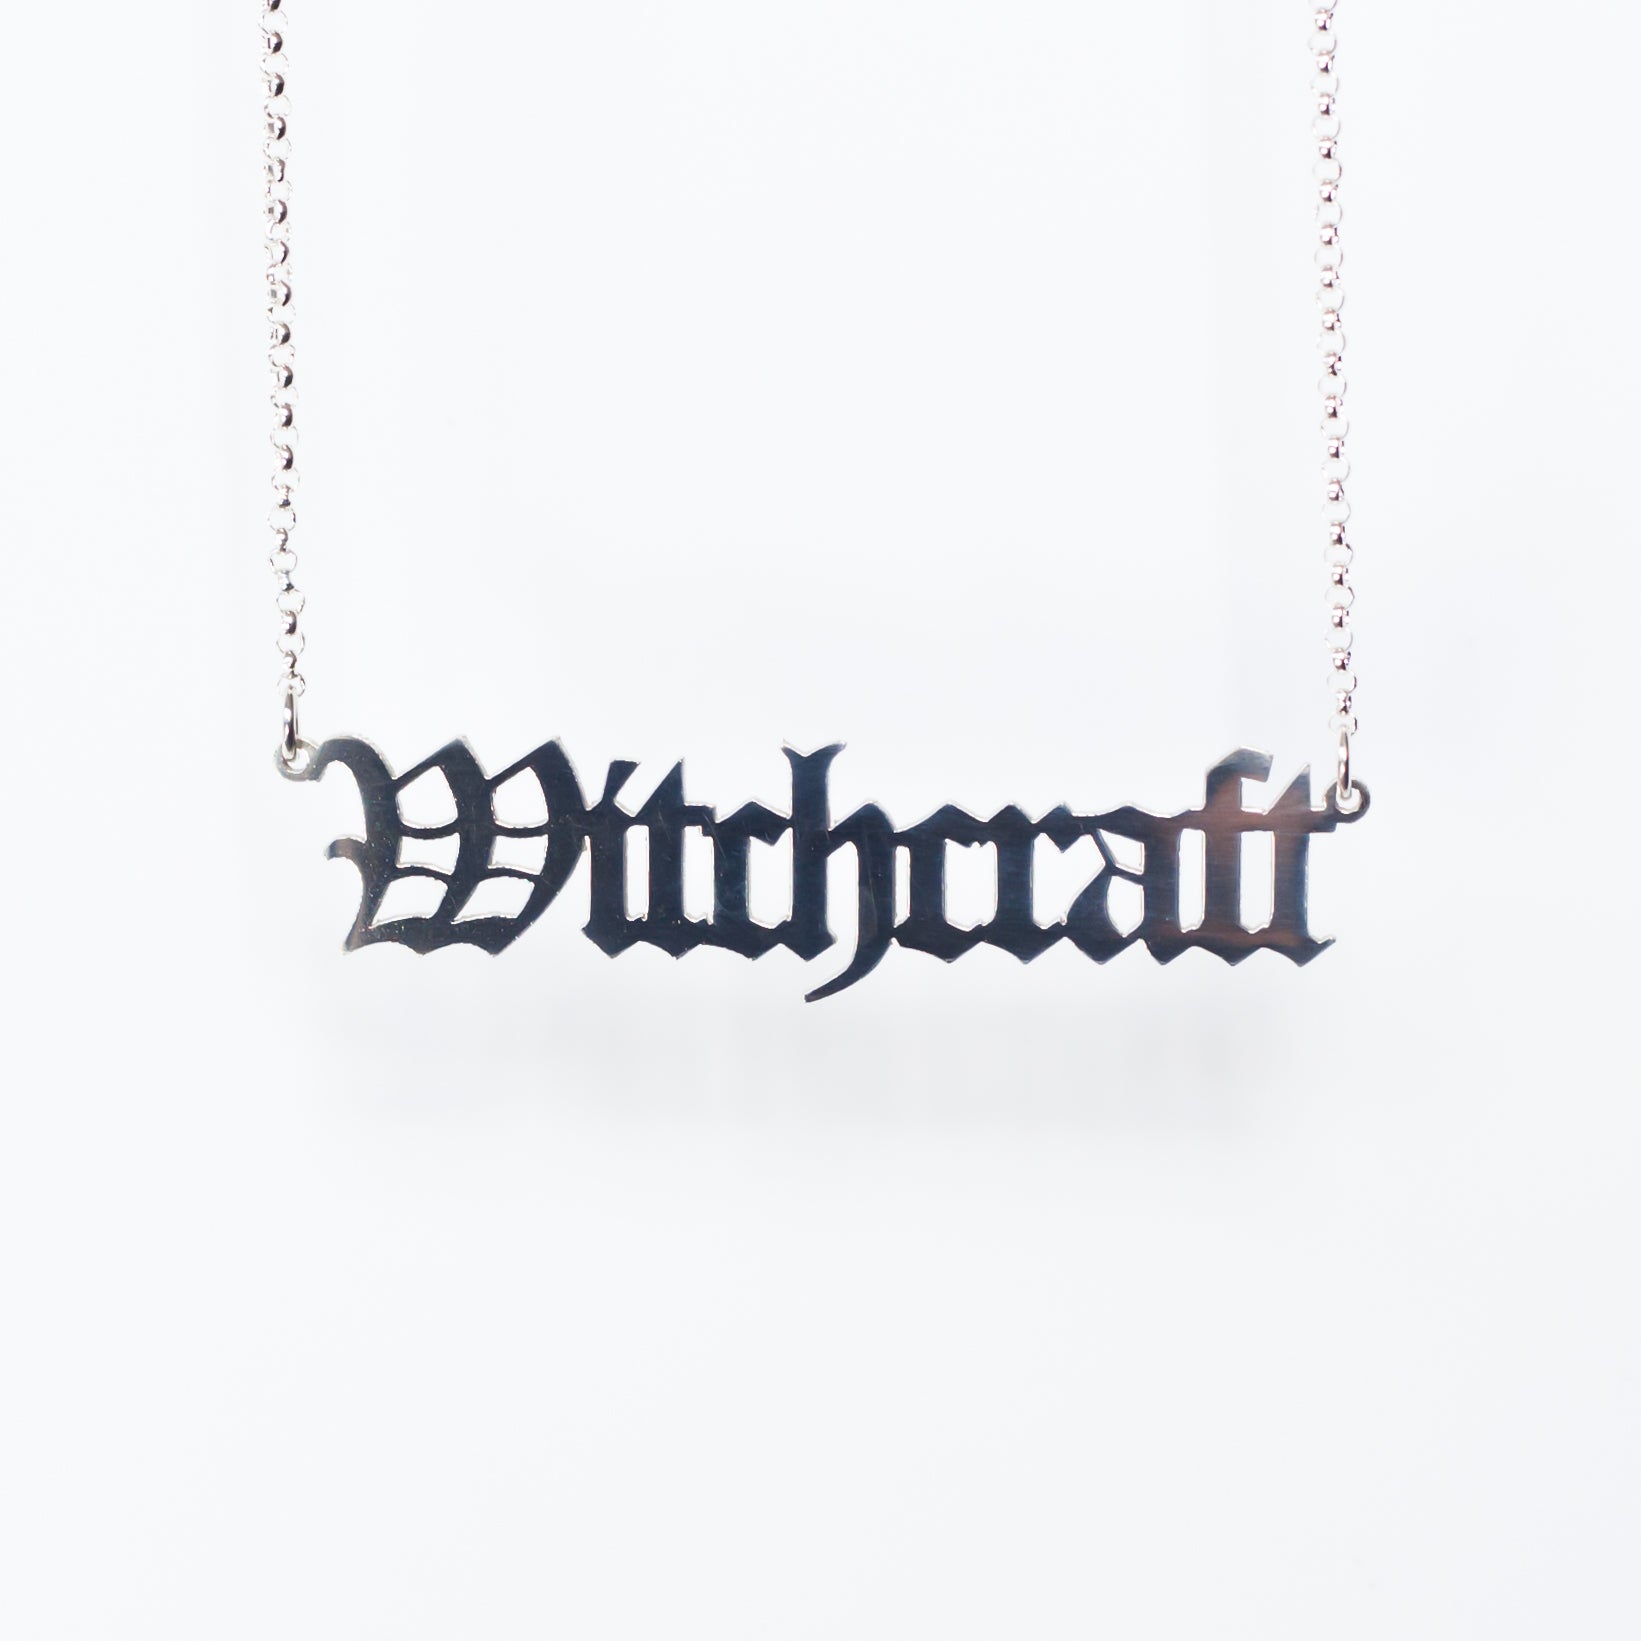 Witchcraft Necklace in gothic blackletter font in sterling silver